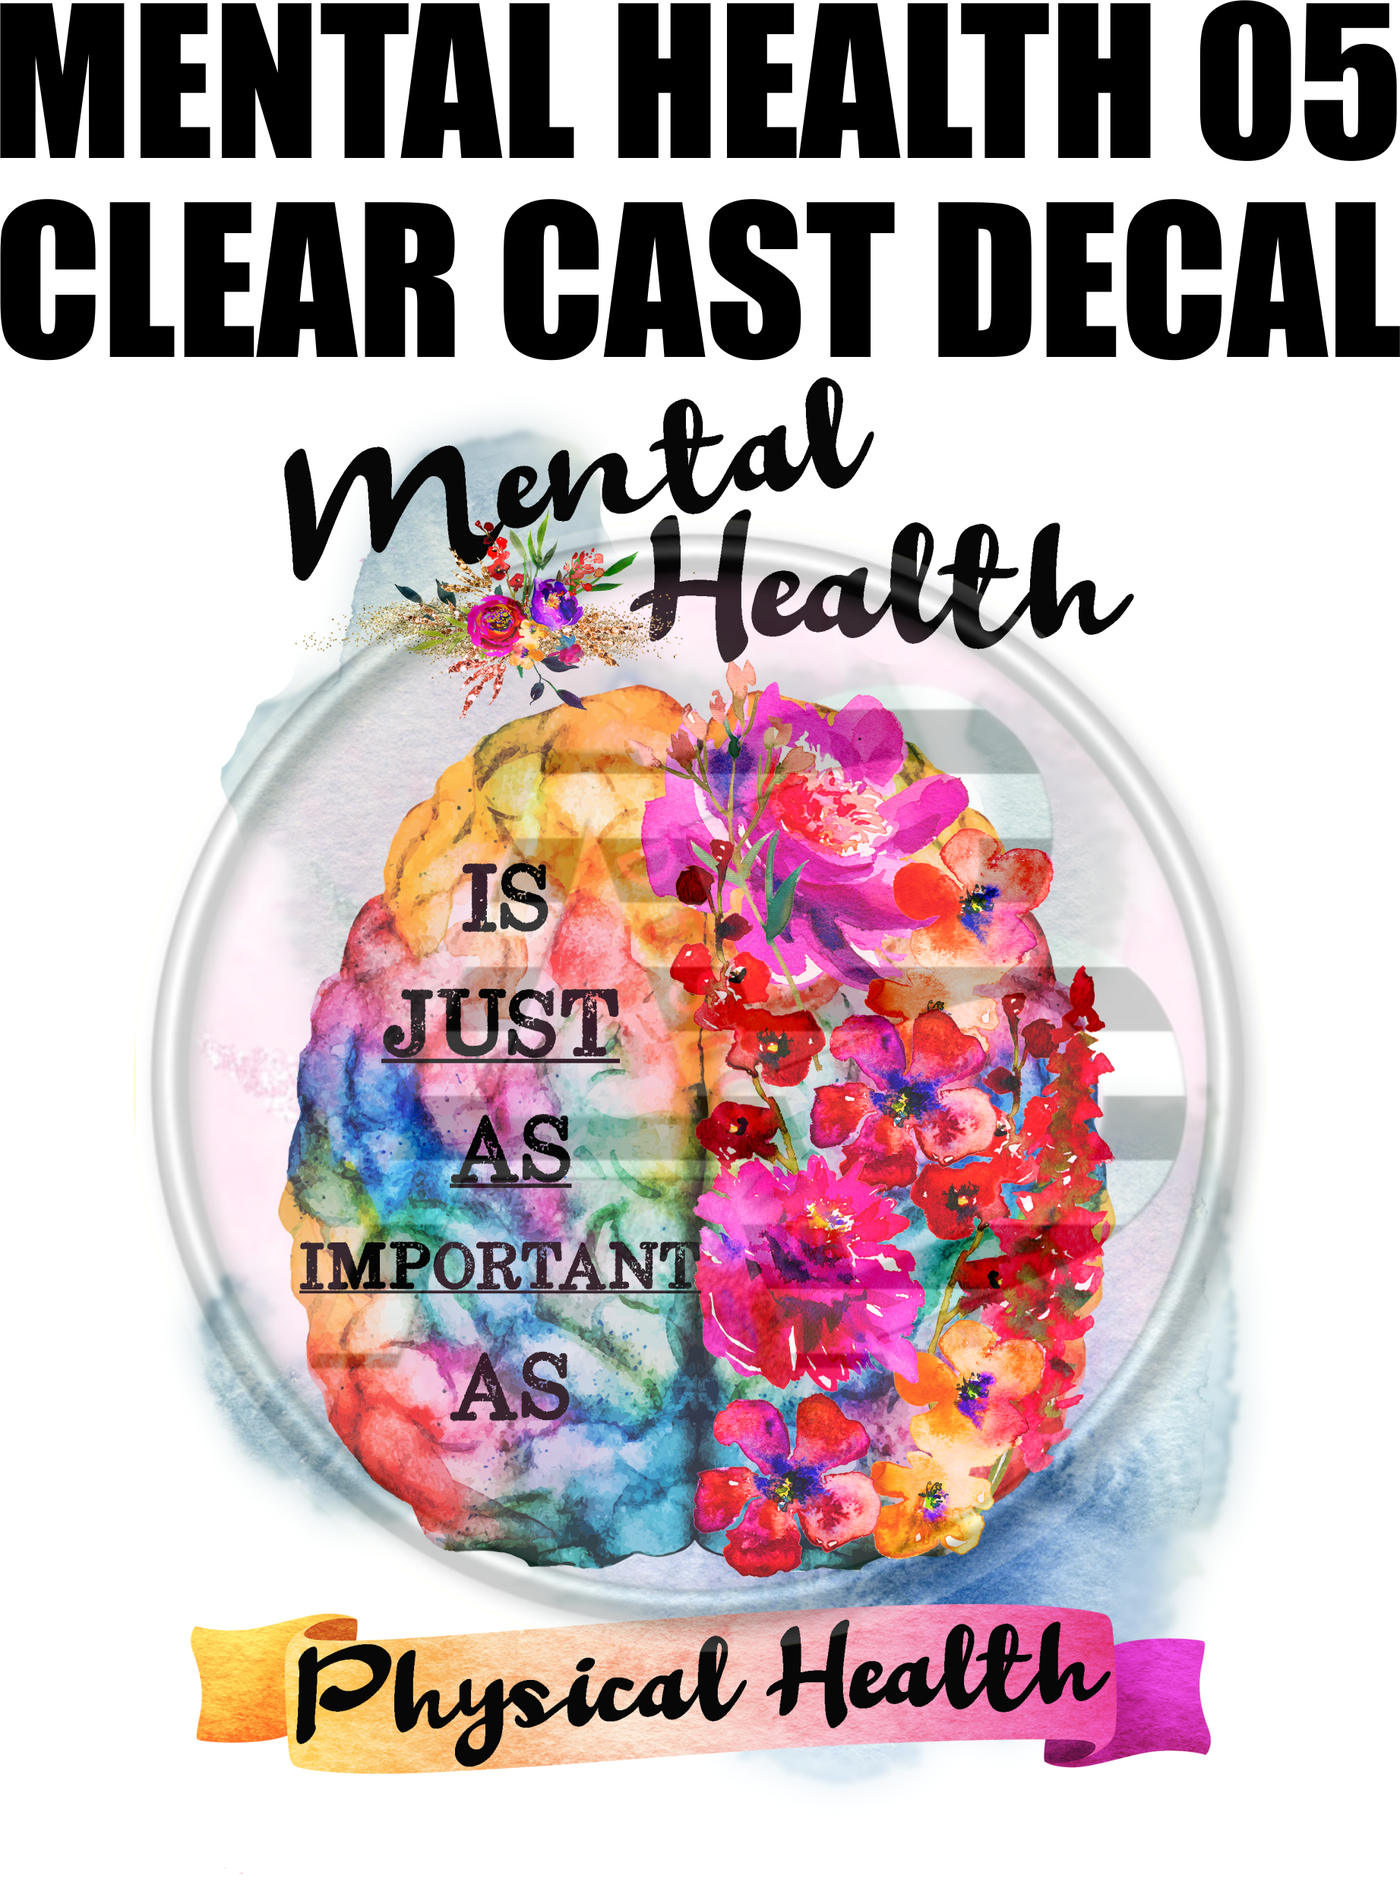 Mental Health 05 - Clear Cast Decal